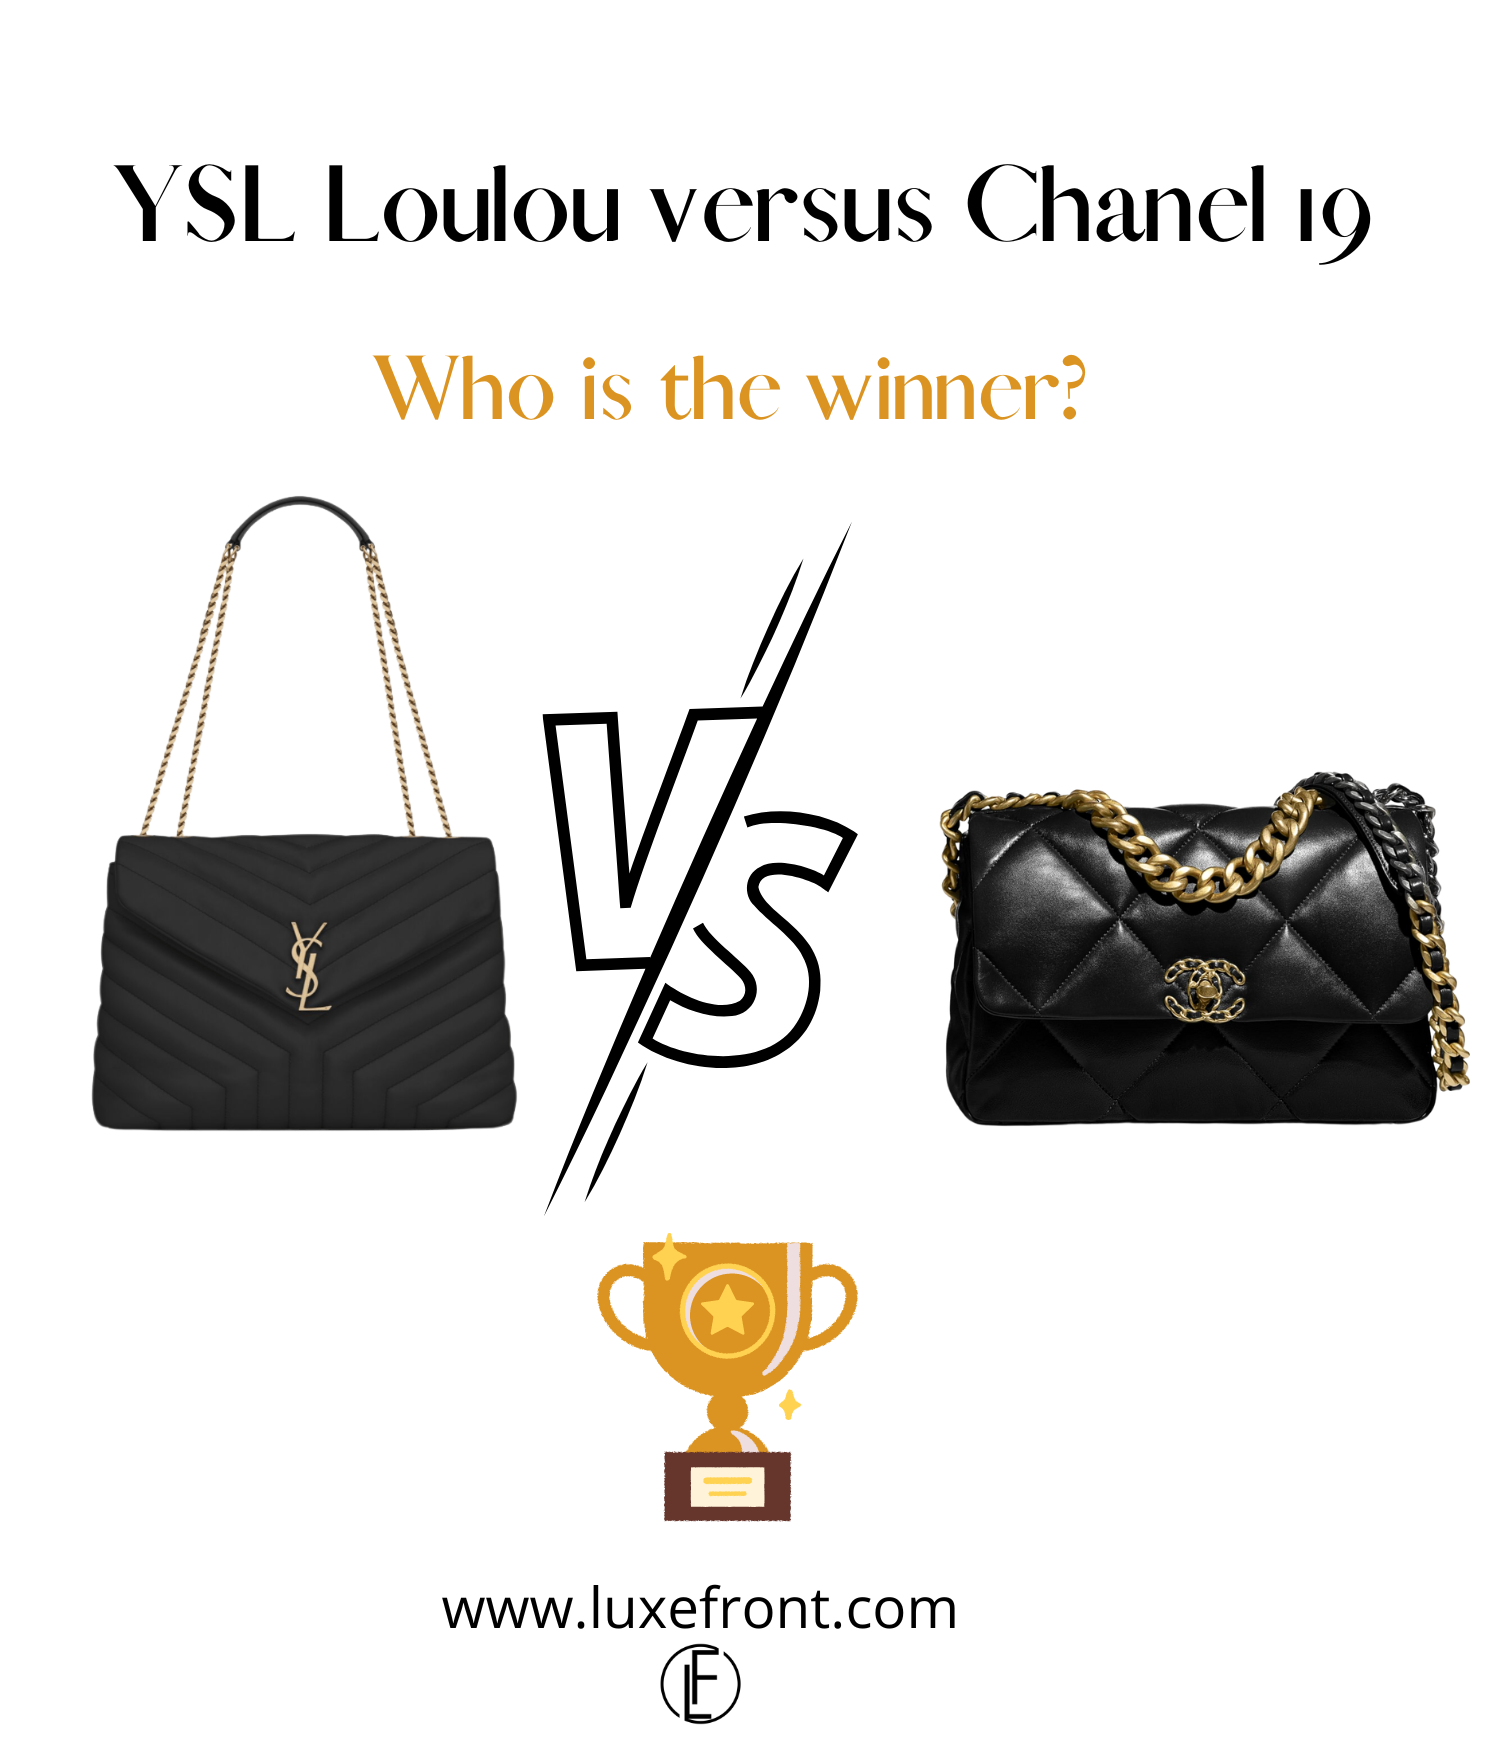 YSL Loulou versus Chanel 19. Which is the better buy?